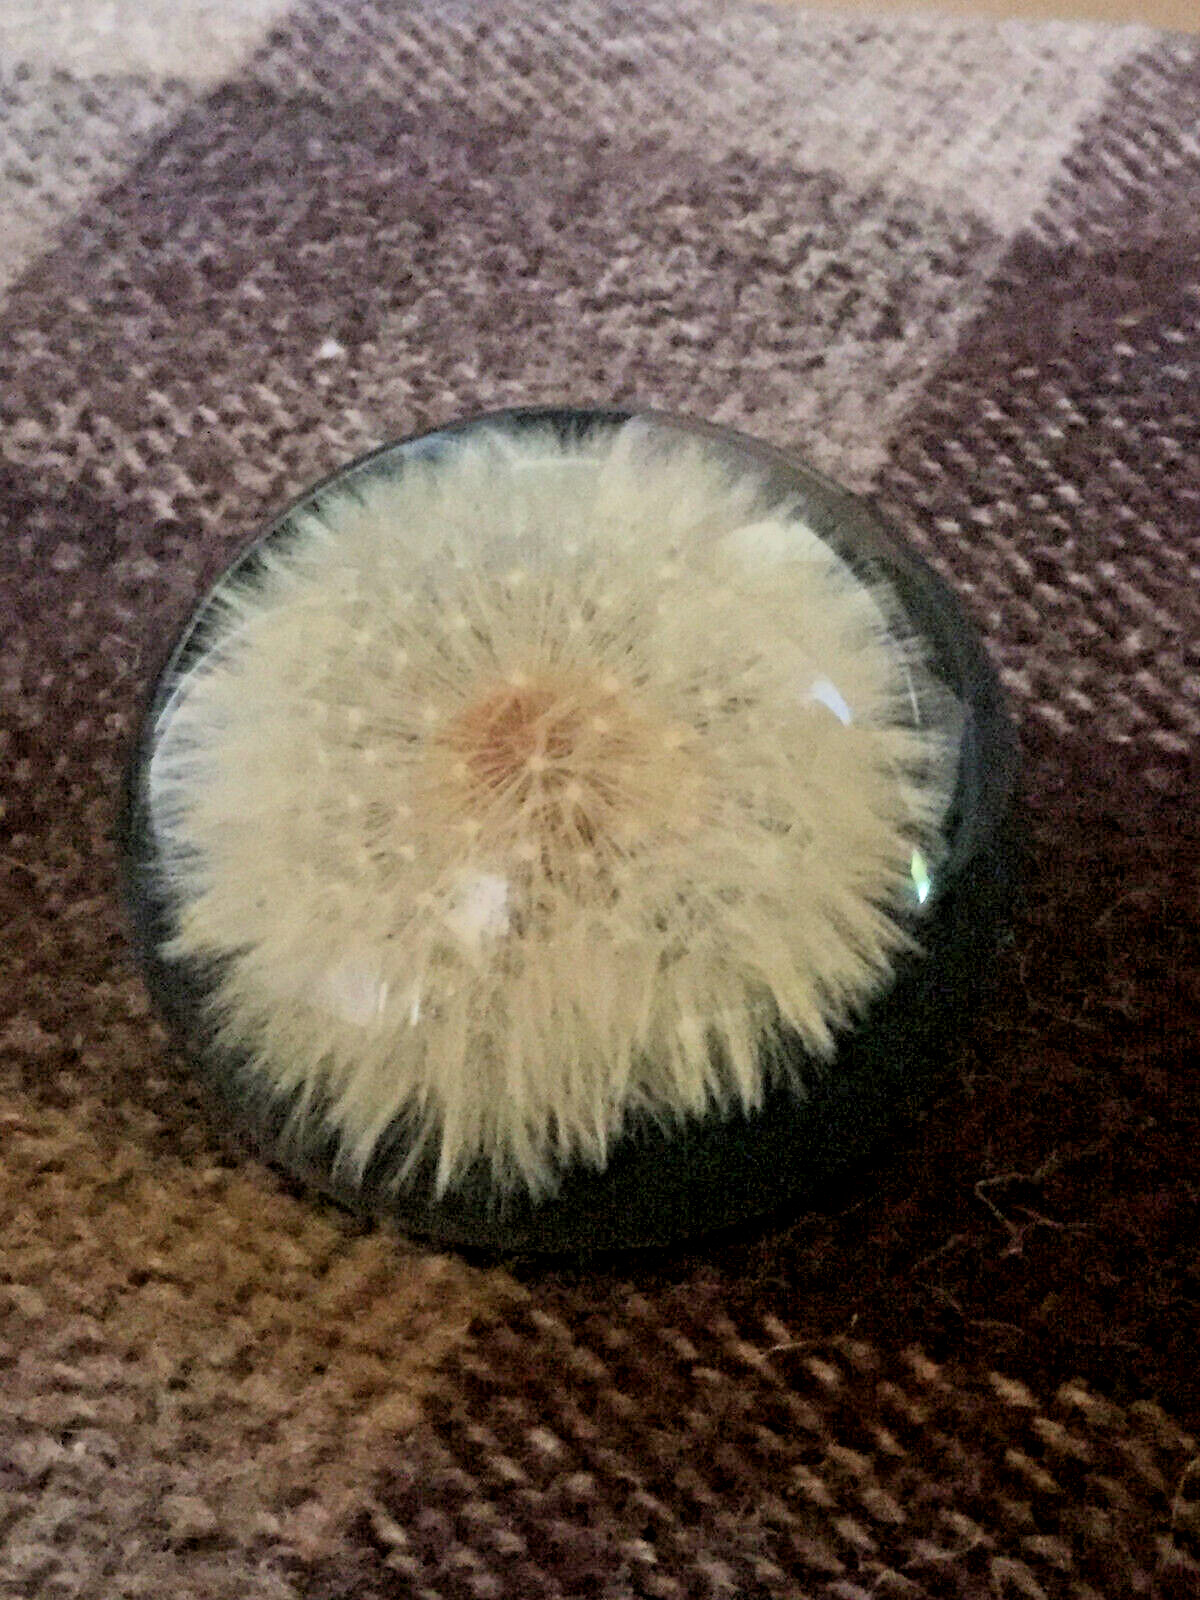 Vintage Tarax Infinity Dandelion Seed Puff Paperweight Handcrafted In Canada